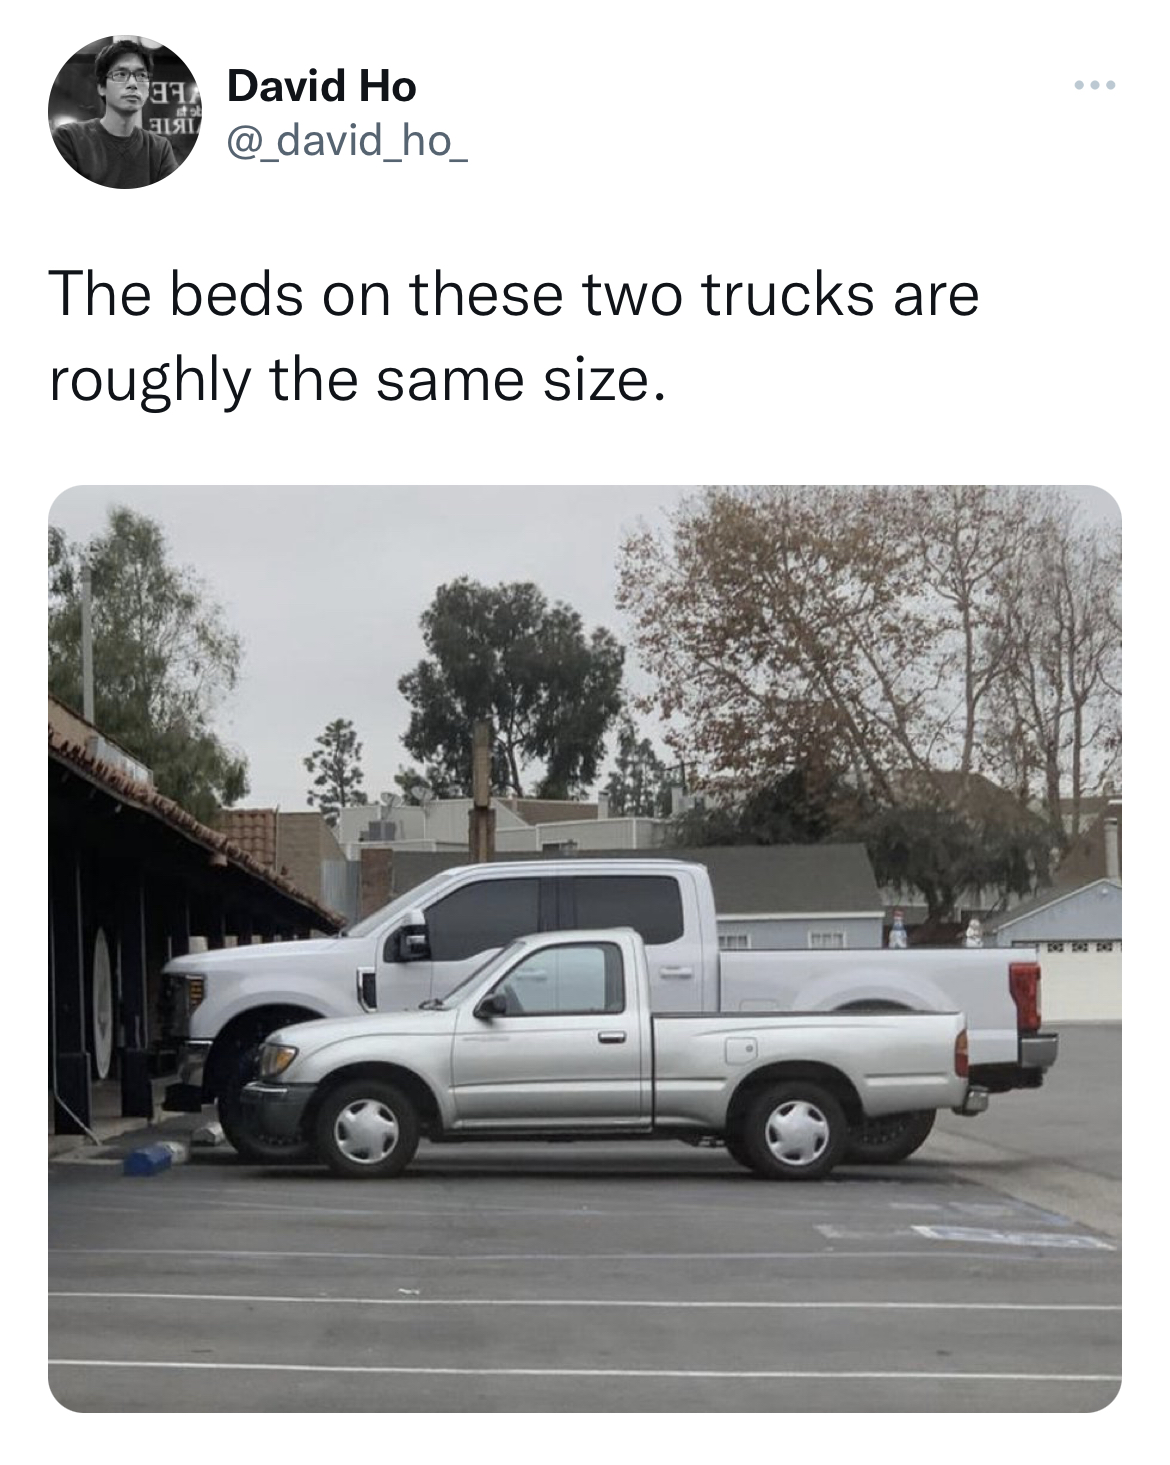 pickup trucks getting bigger - Say David Ho Bir The beds on these two trucks are roughly the same size.